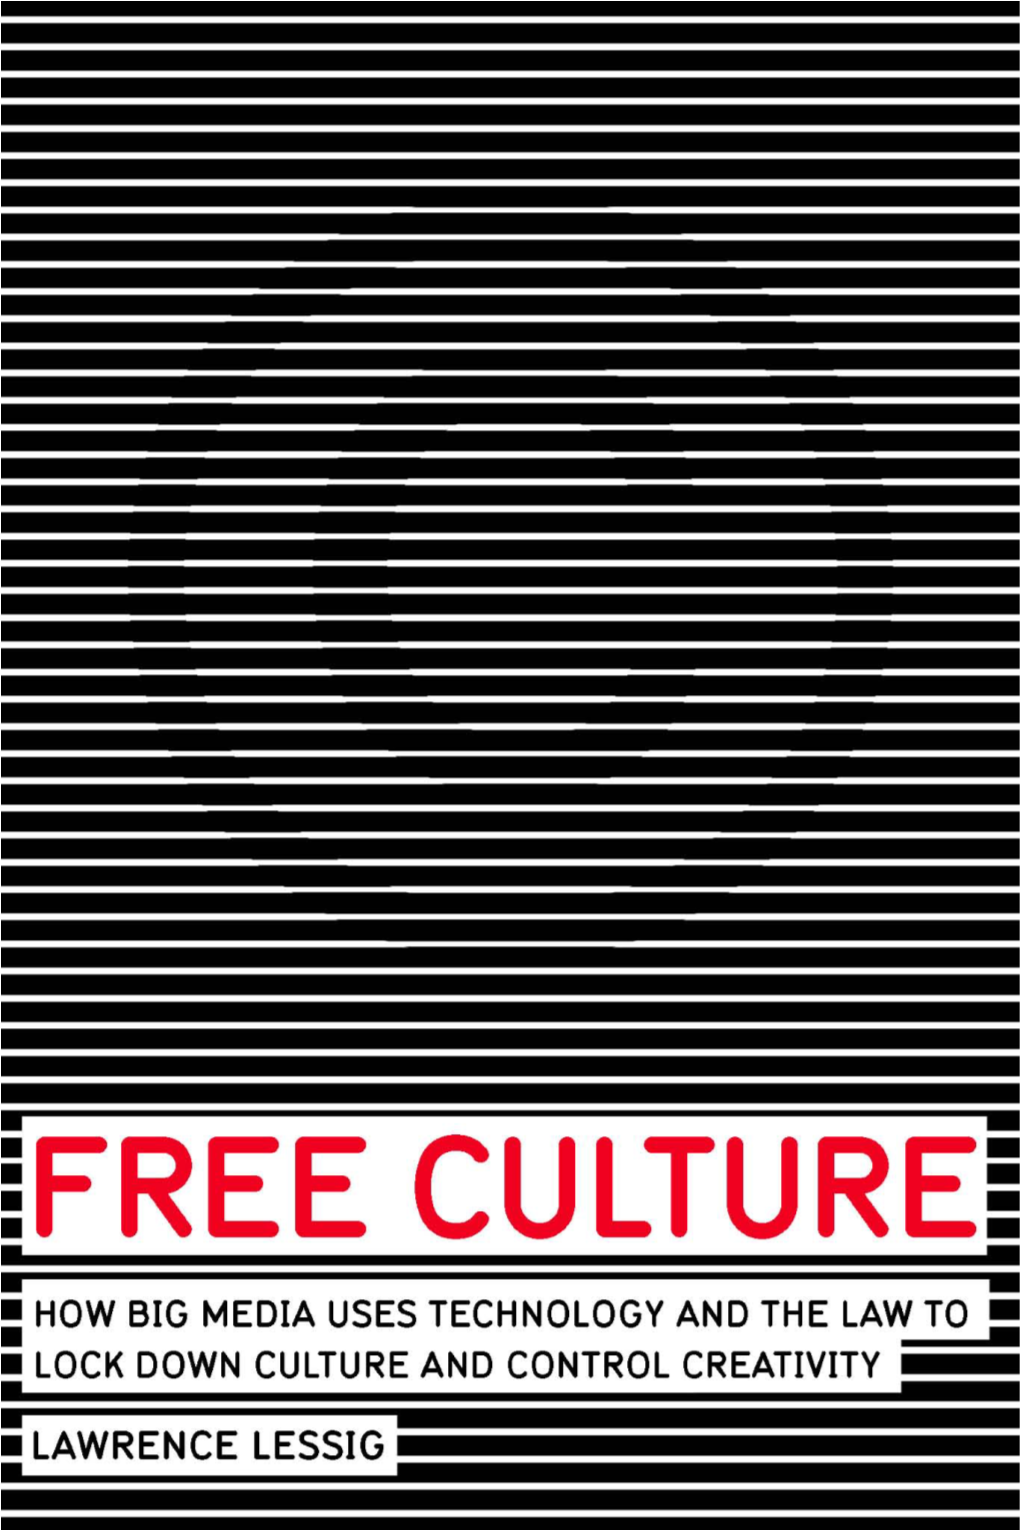 PDF Version of Free Culture Is Licensed Under a Creative Commons License